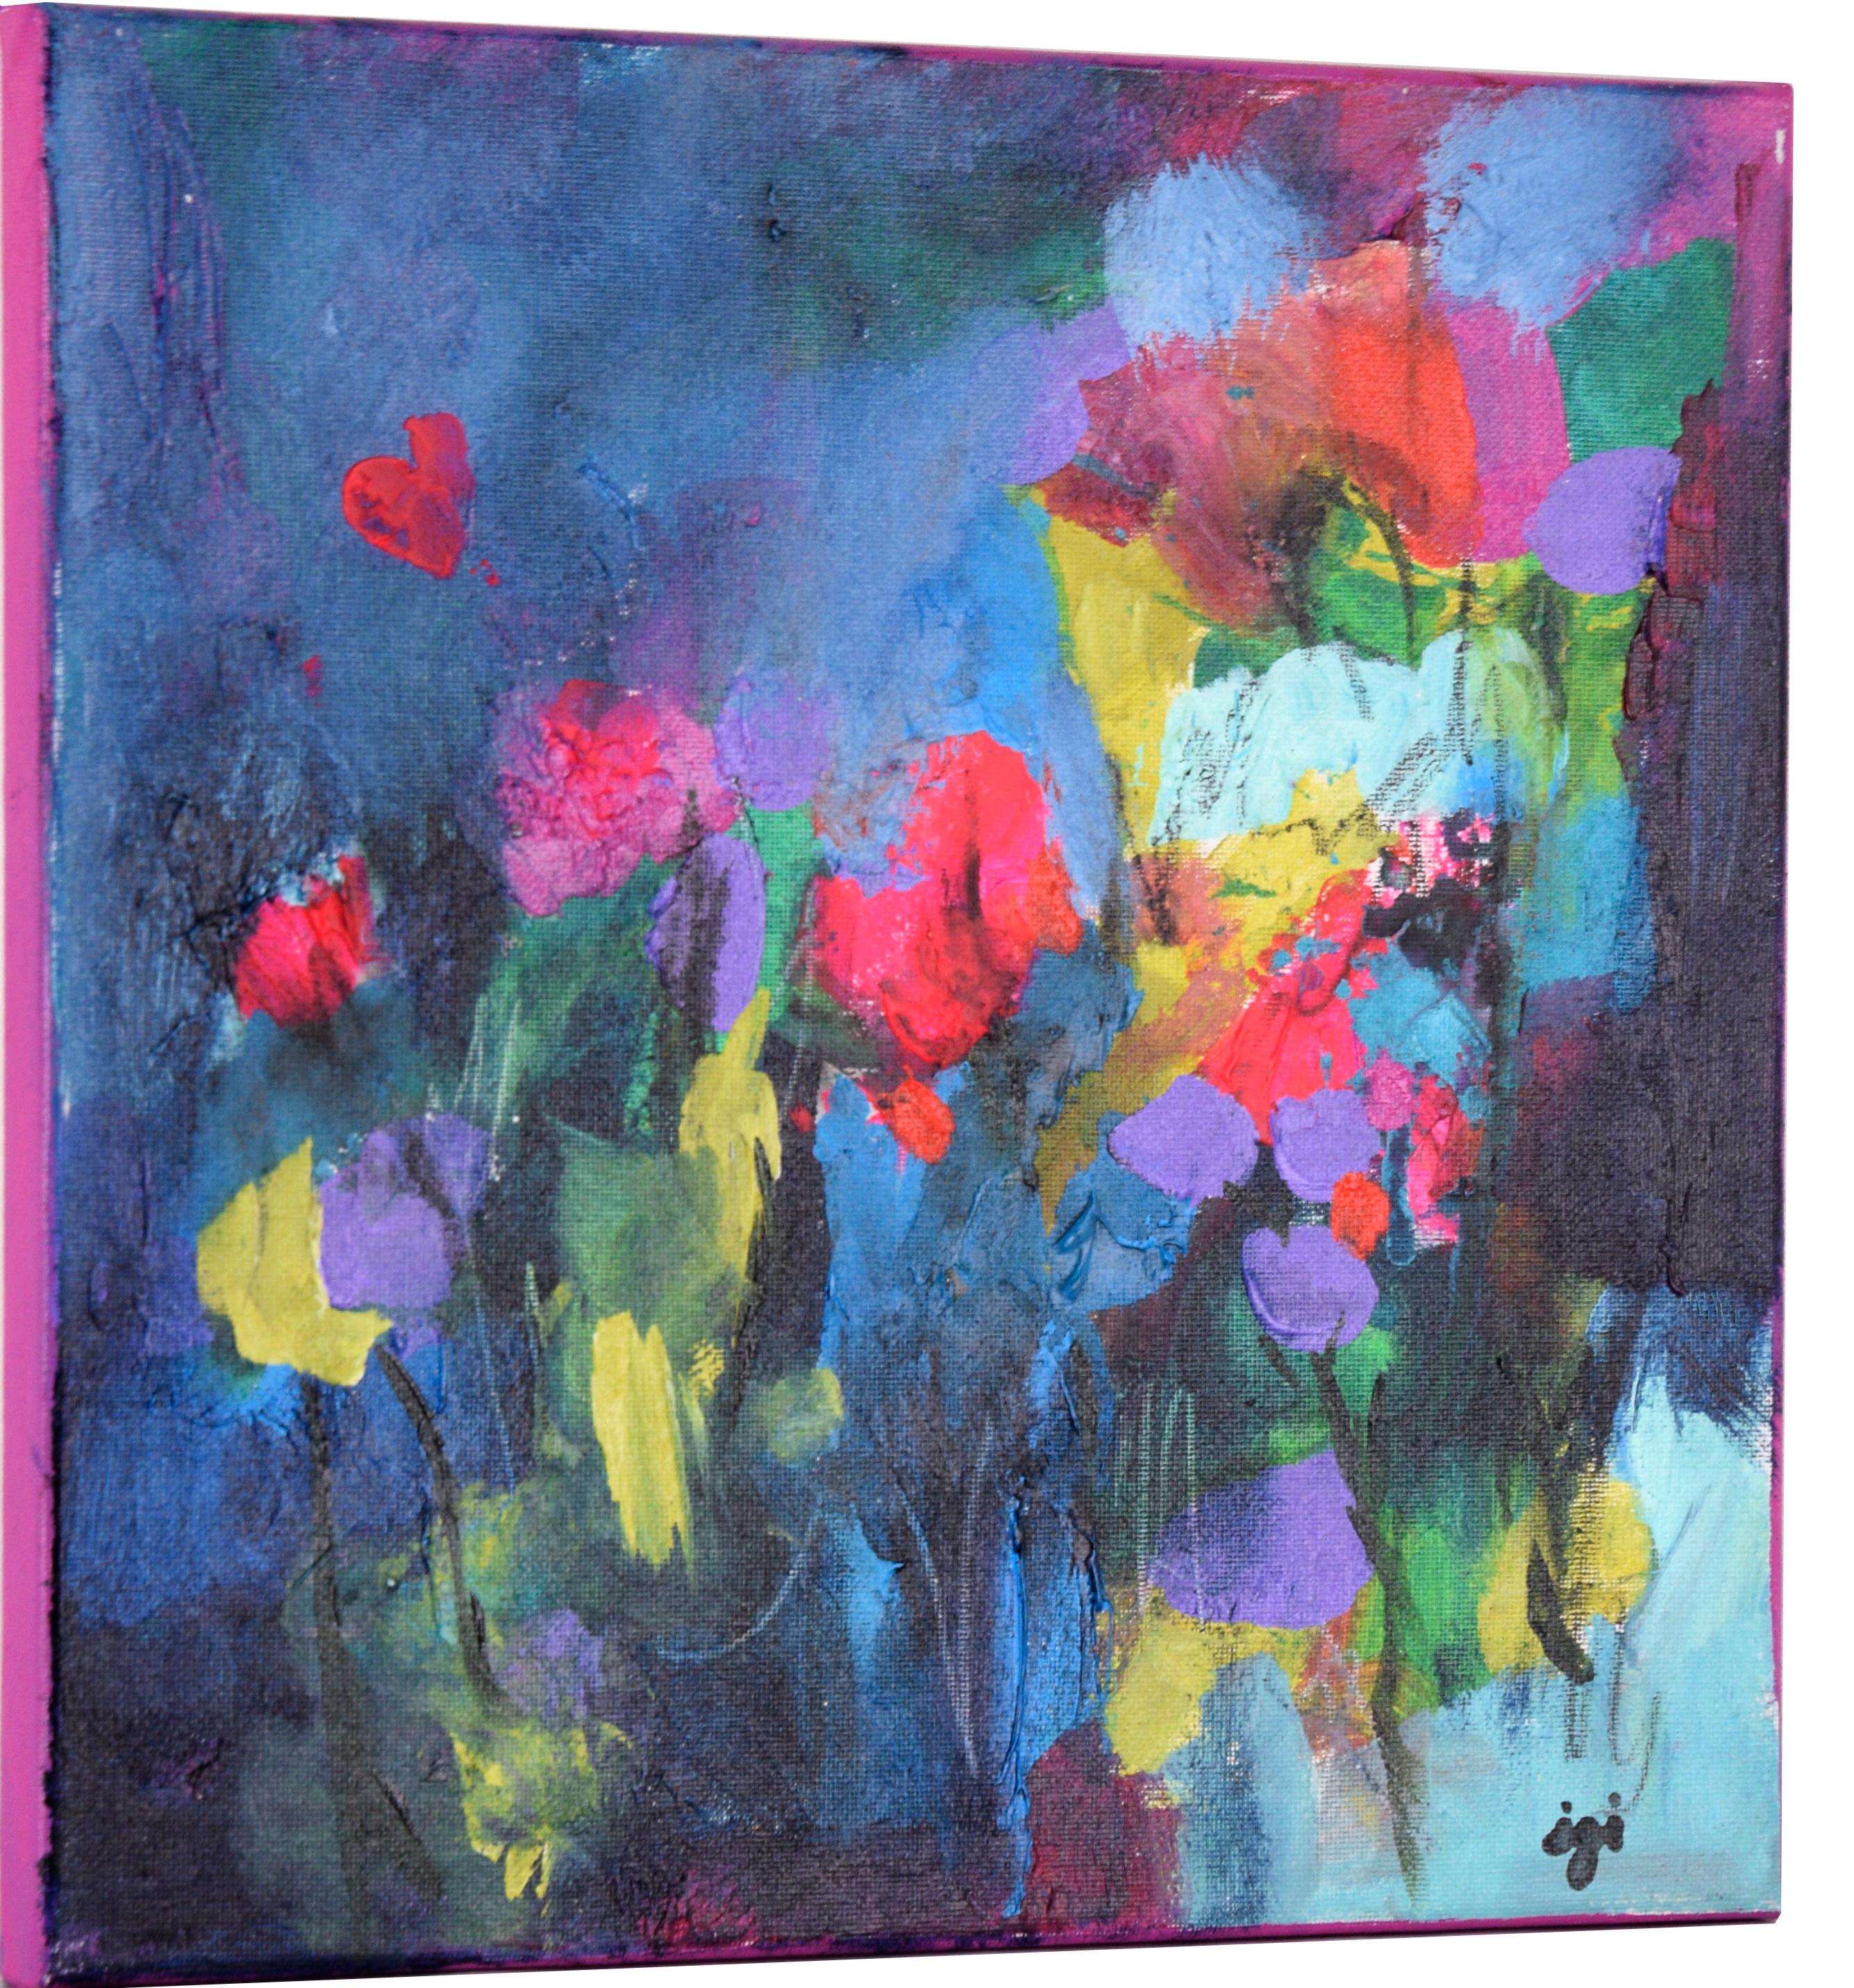 Abstracted Field of Flowers - Painting by Ilana Ingber